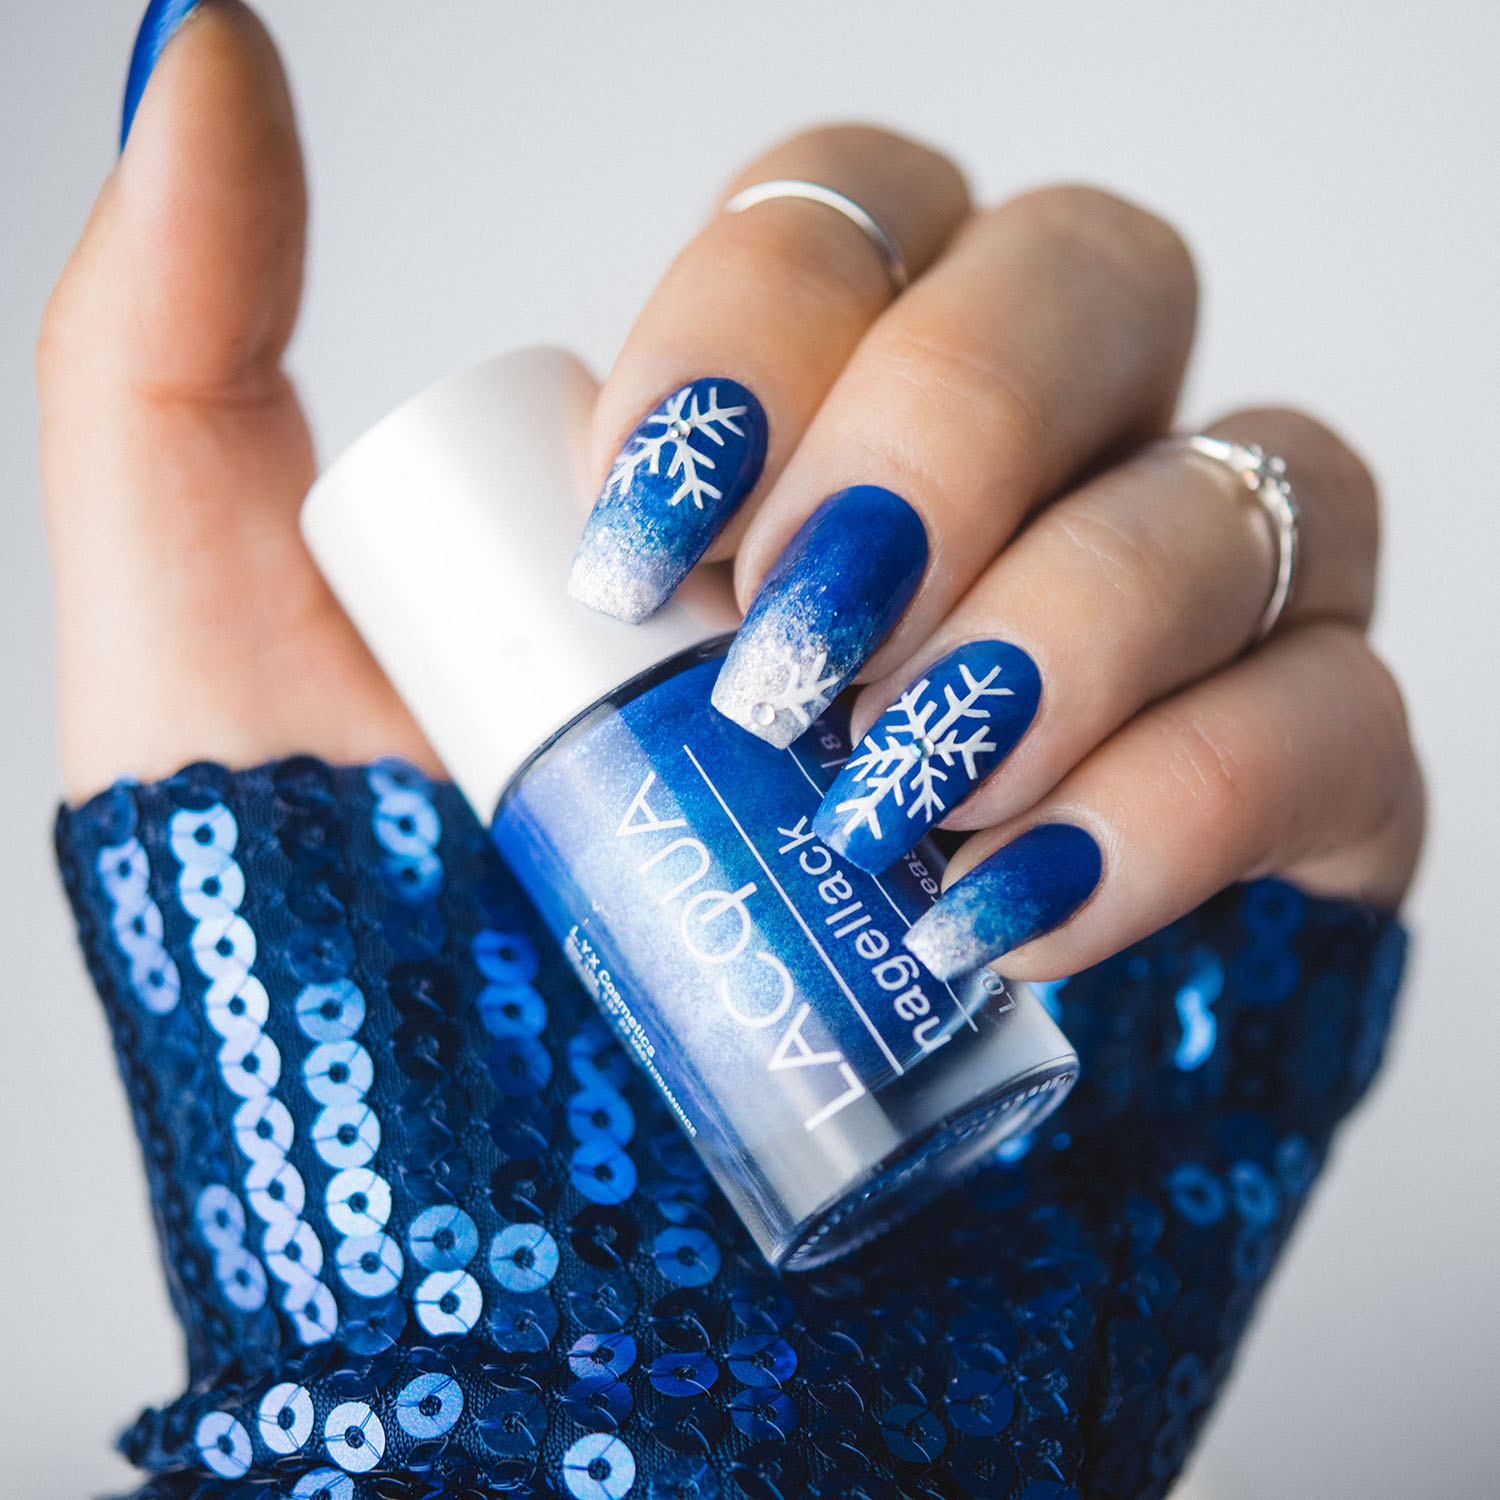 Blue & White Ombre Nails with Snowflakes